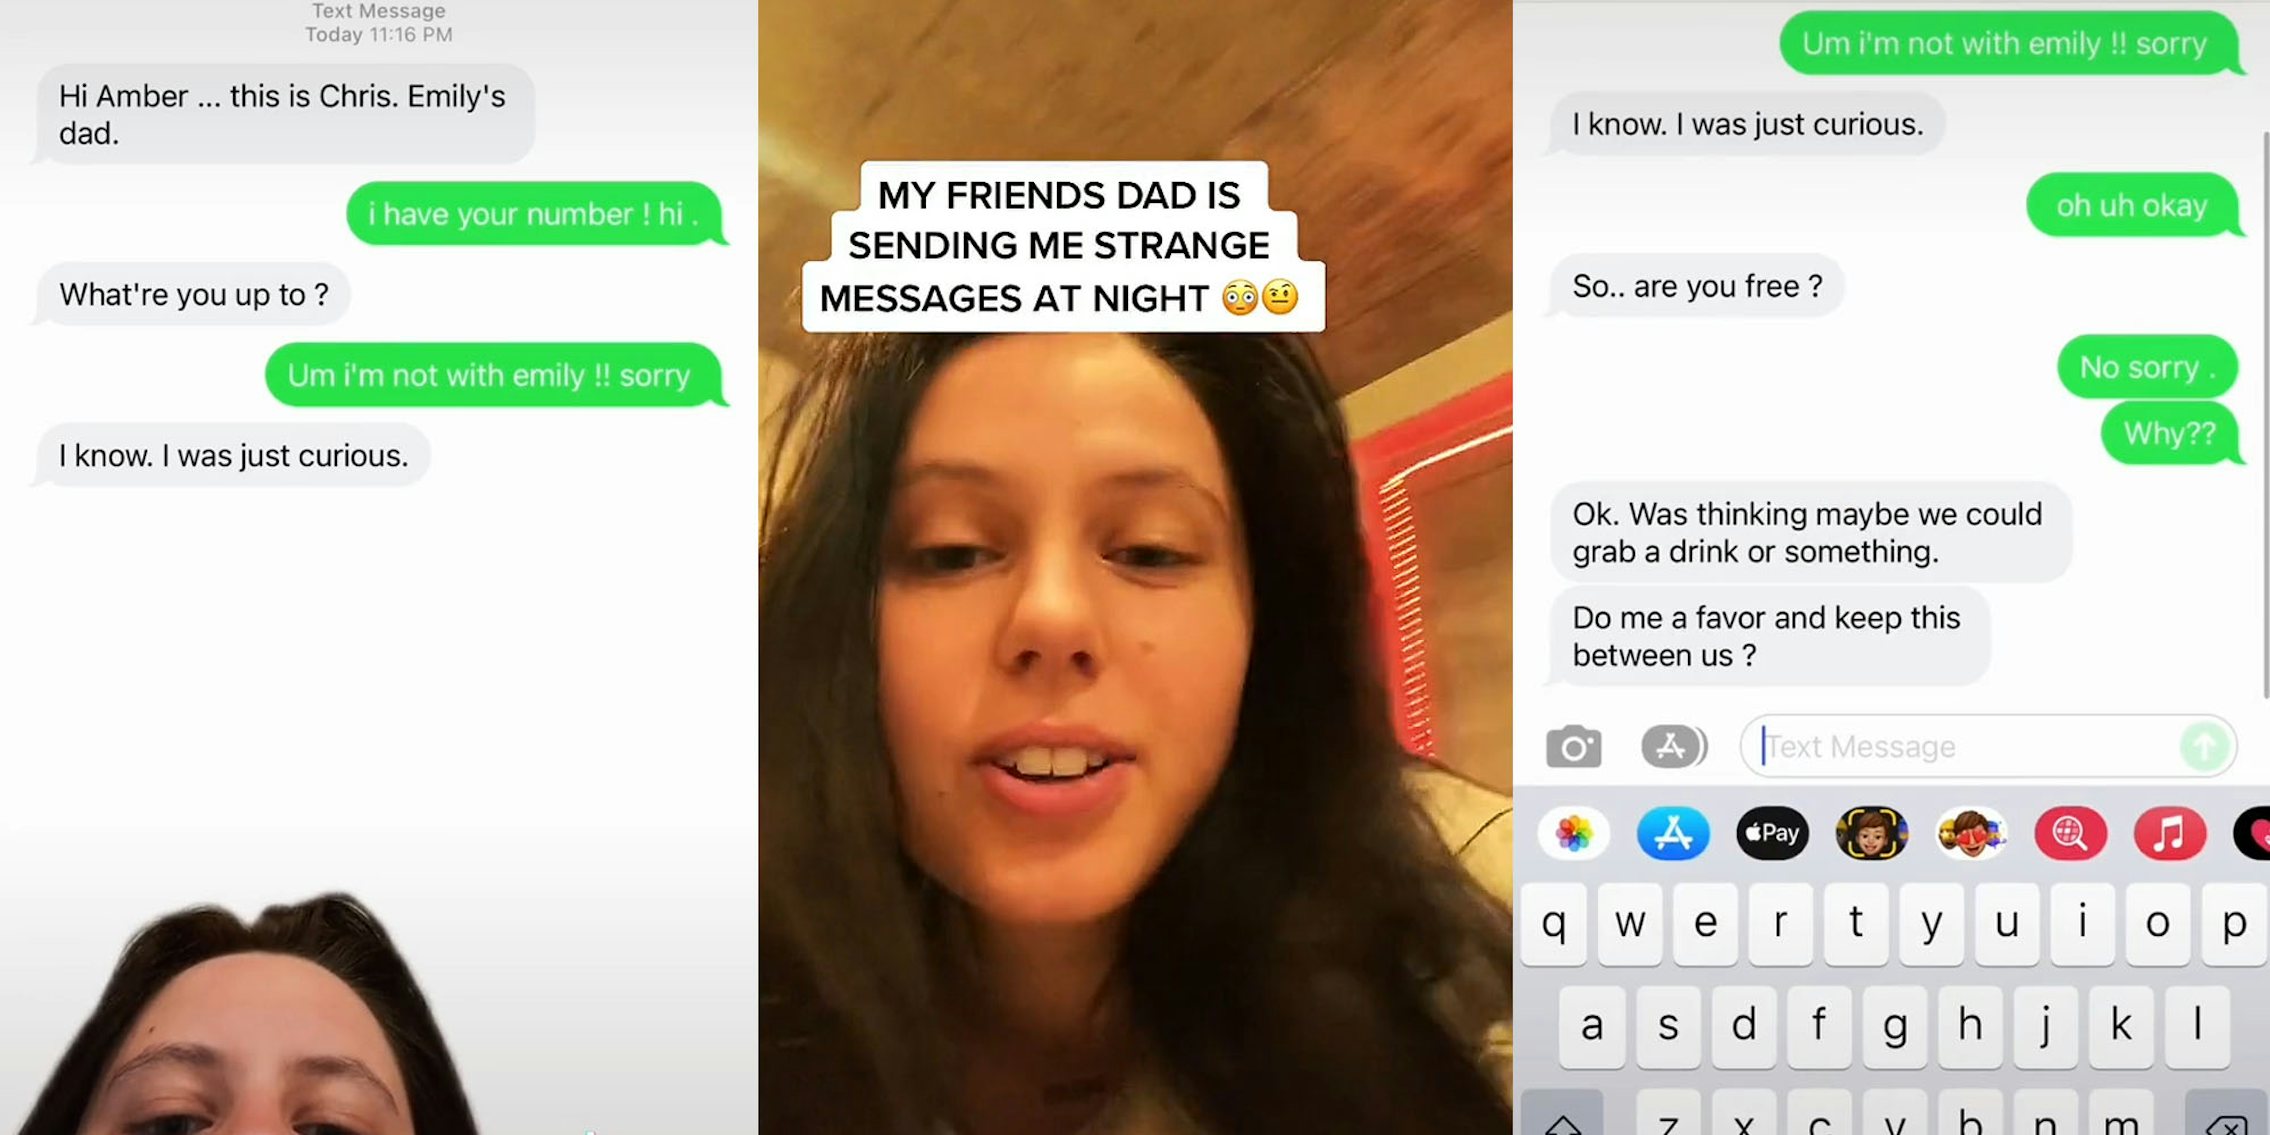 Woman greenscreen tiktok over text messenges caption 'Hi Amber... this is Chris. Emily's dad. i have your number! hi What're you up to? Um i'm not with emily!! sorry I know. I was just curious.' (l) woman talking caption 'MY FRIENDS DAD IS SENDING ME STRANGE MESSAGES AT NIGHT' (c) text messages caption 'I know. I was just curious. oh uh okay So.. are you free? No sorry. Why?? Ok. Was thinking maybe we could grab a drink or something. Do me a favor and keep this between us?' (r)